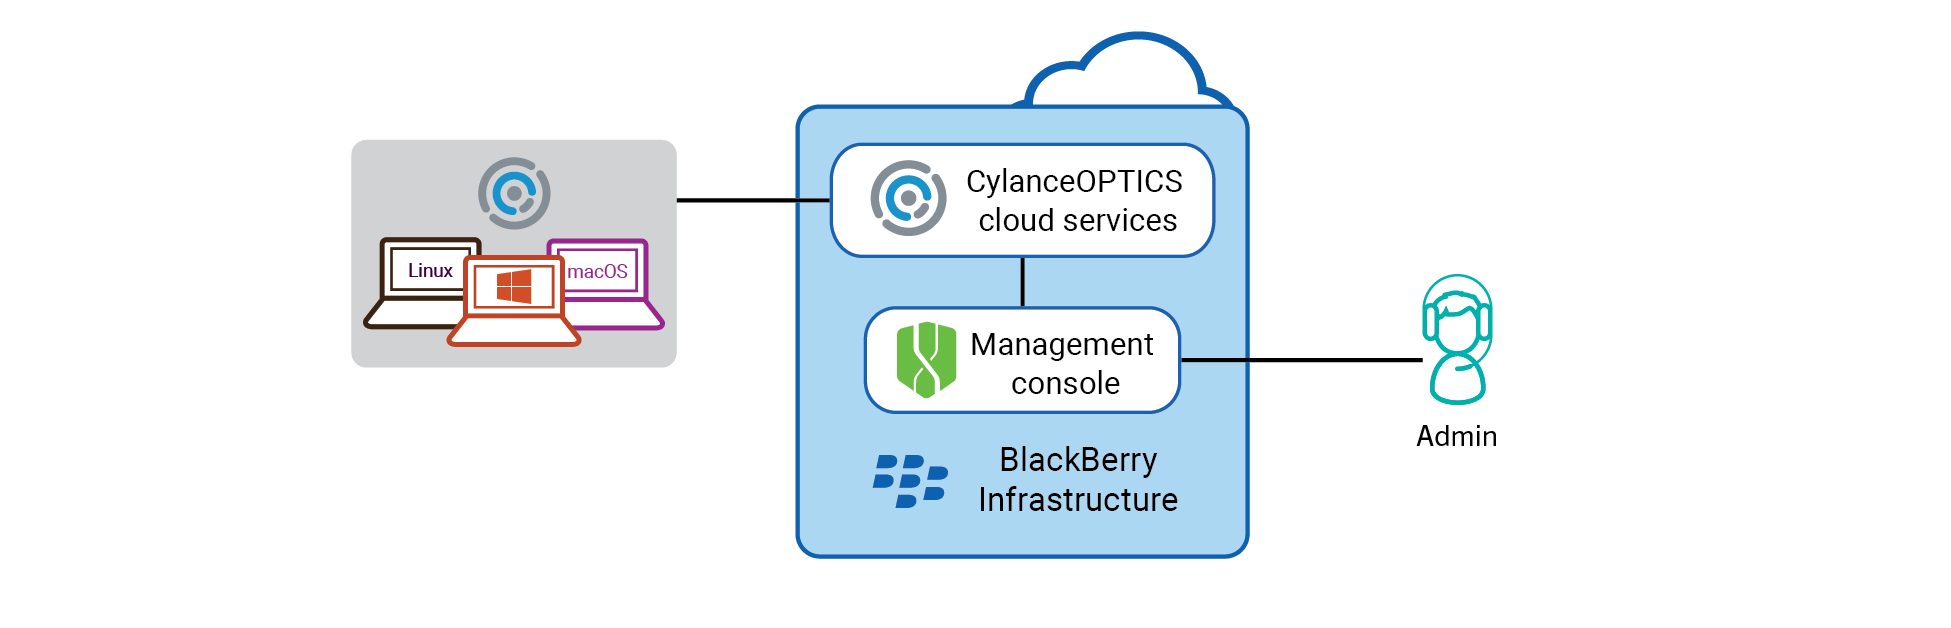 The components of the CylanceOPTICS solution: the management console, cloud services, and devices with the CylanceOPTICS agent.